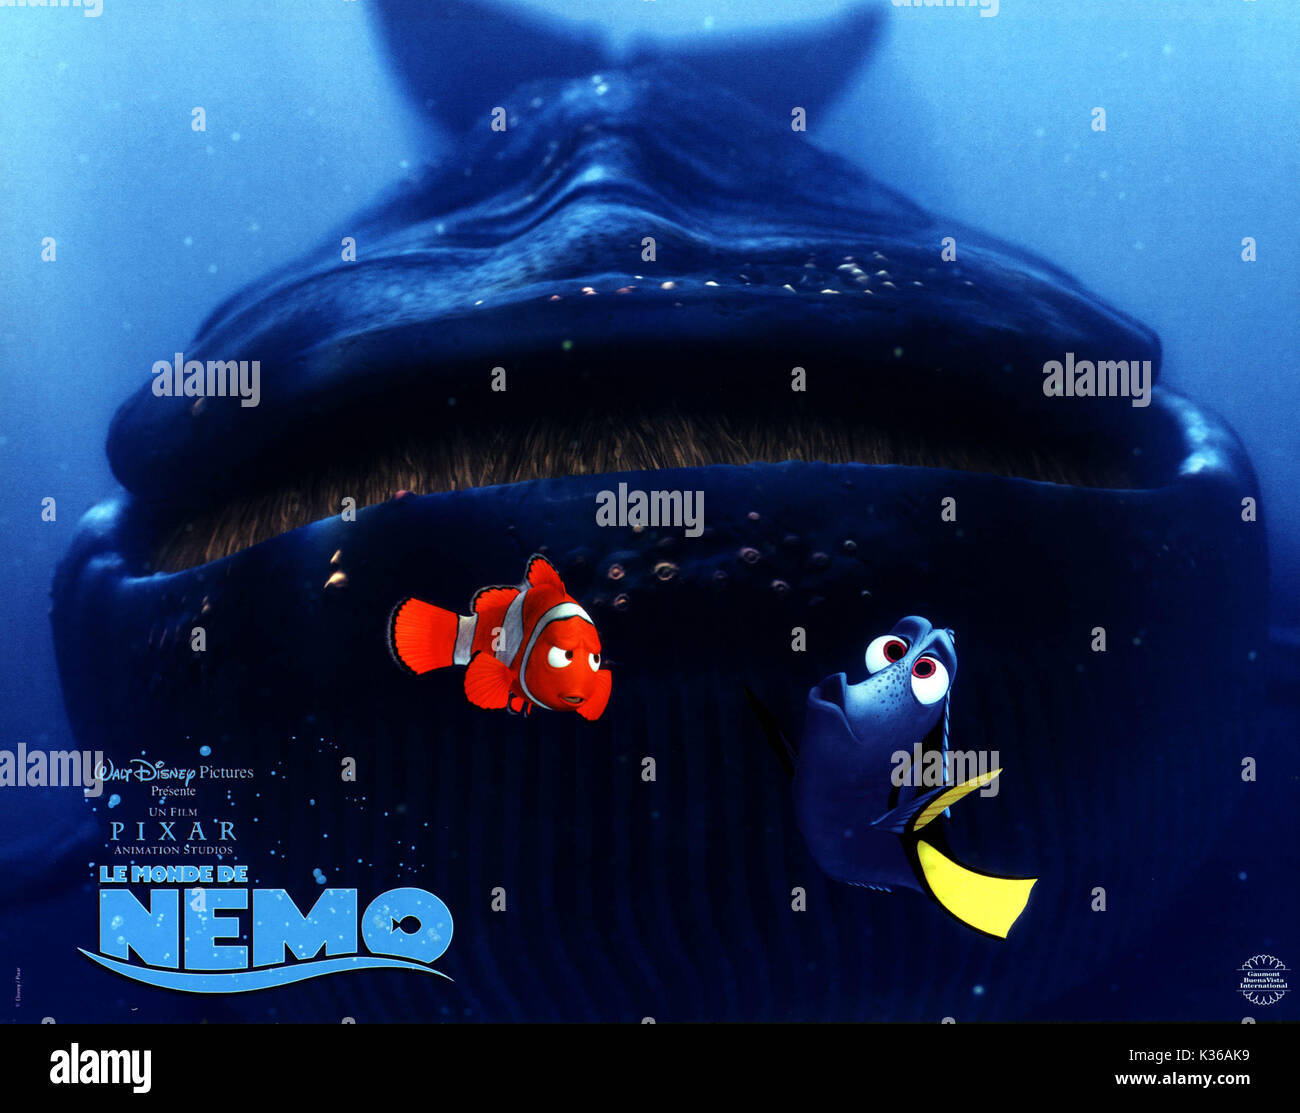 Finding Nemo Marlin And Dory Aand The Whale Please Credit Disneypixar